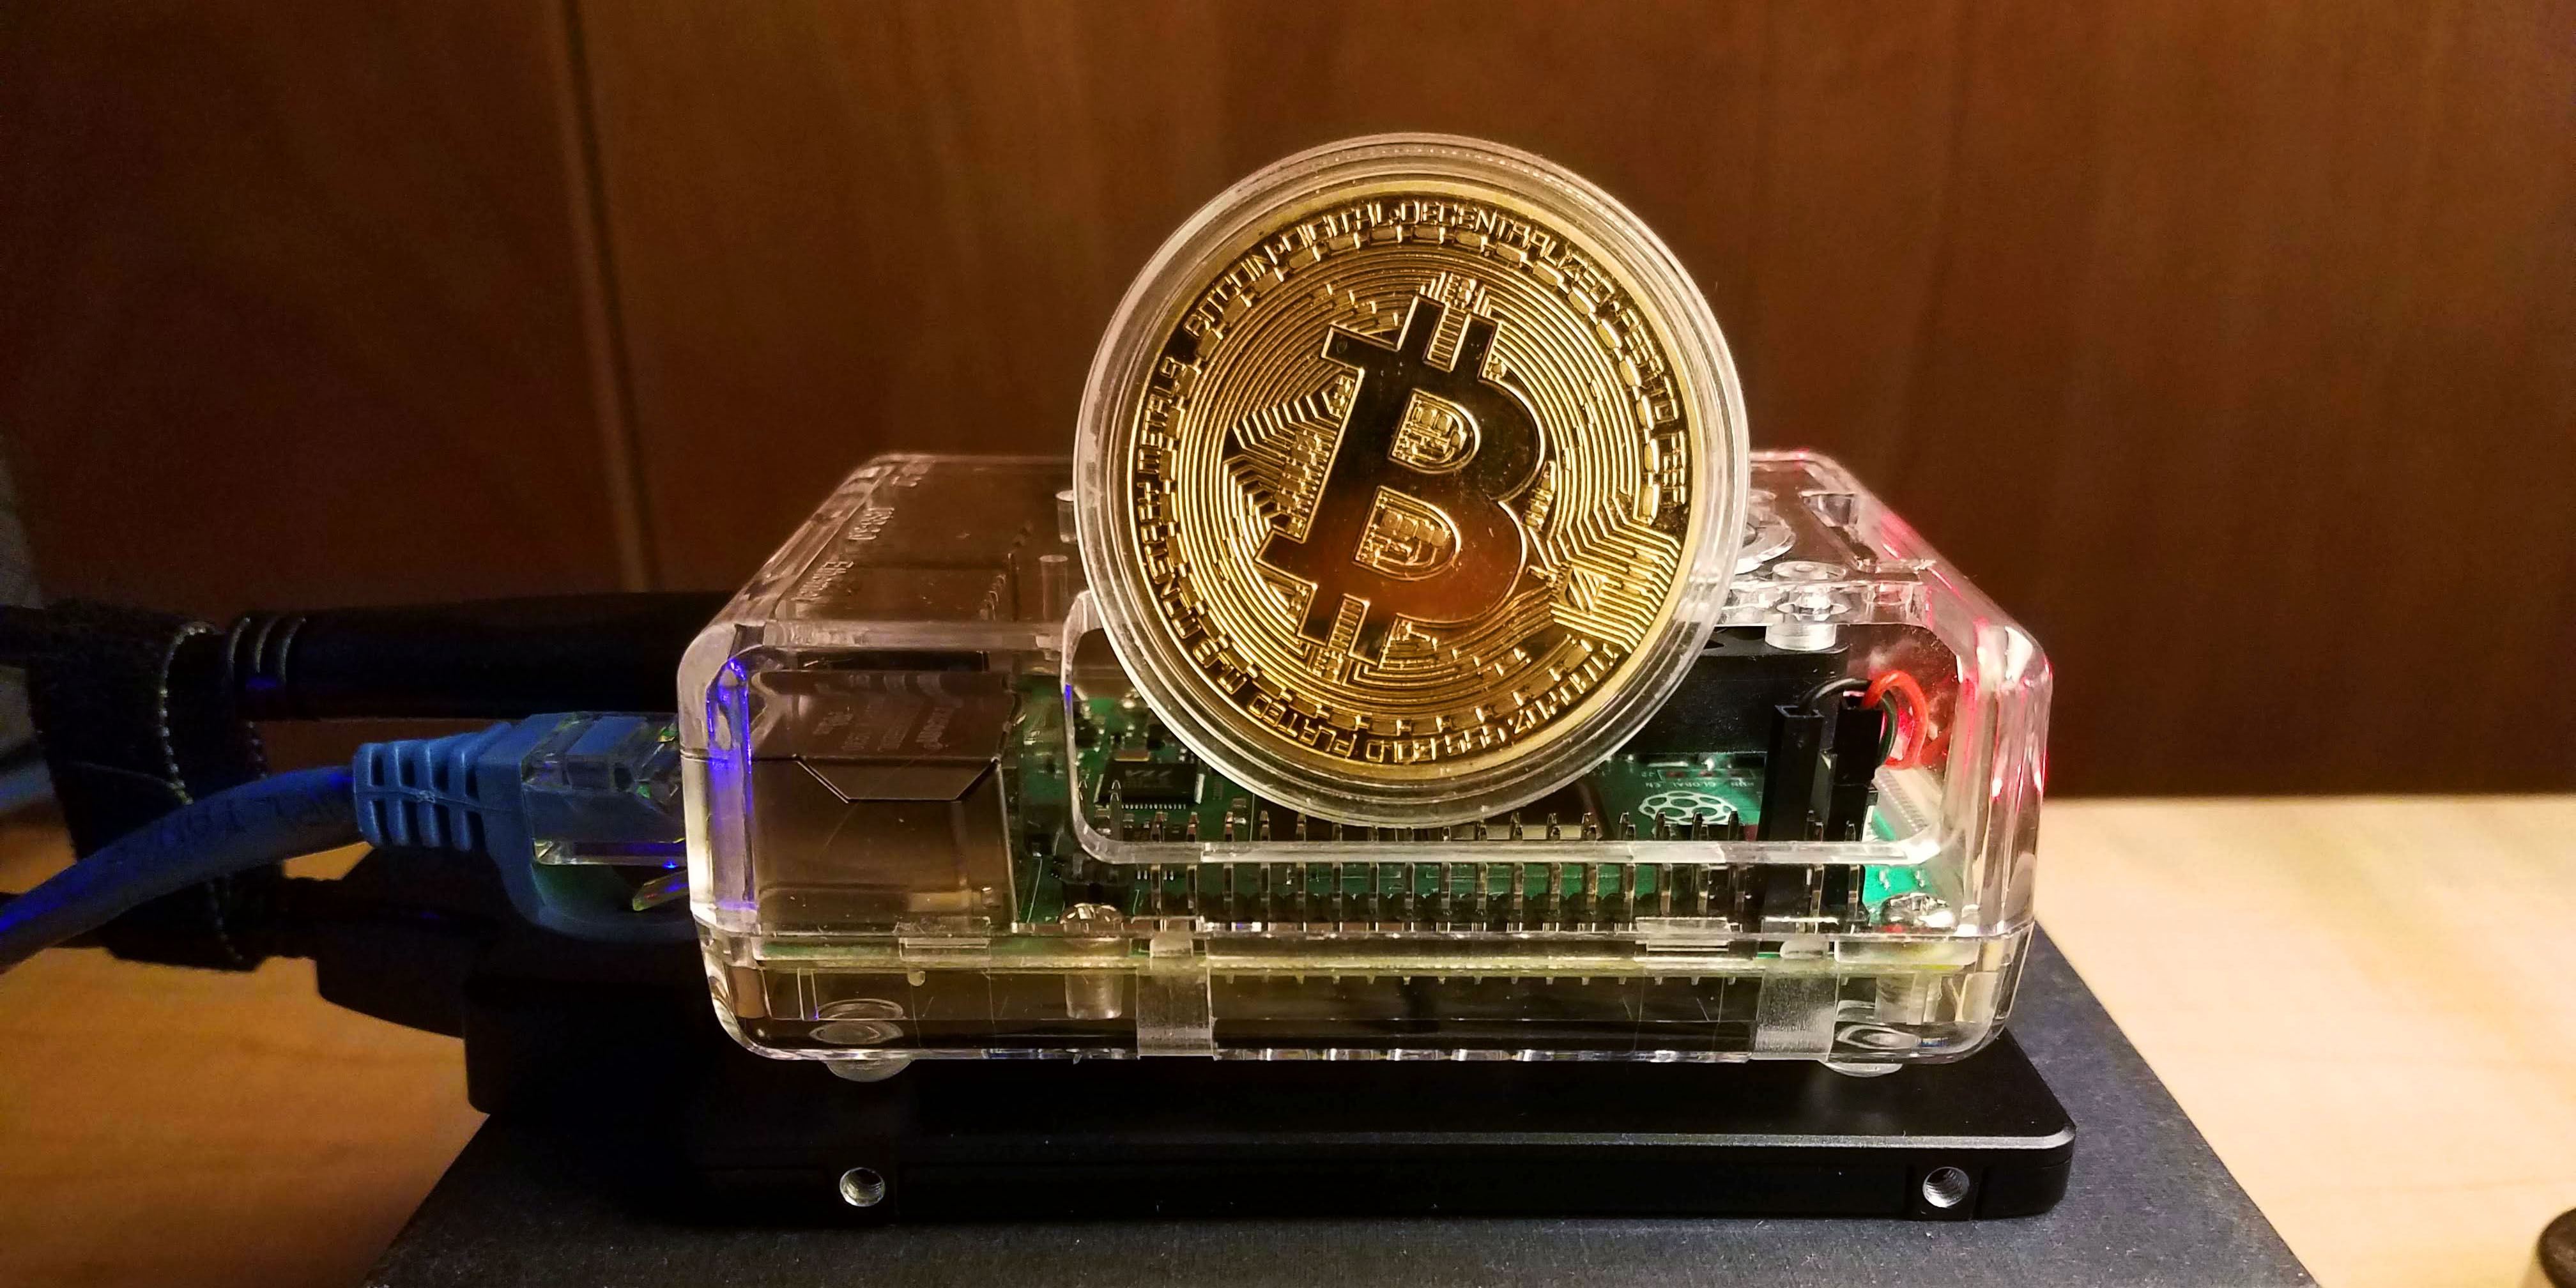 Run Your Own Bitcoin Full Node With Just a Raspberry Pi!